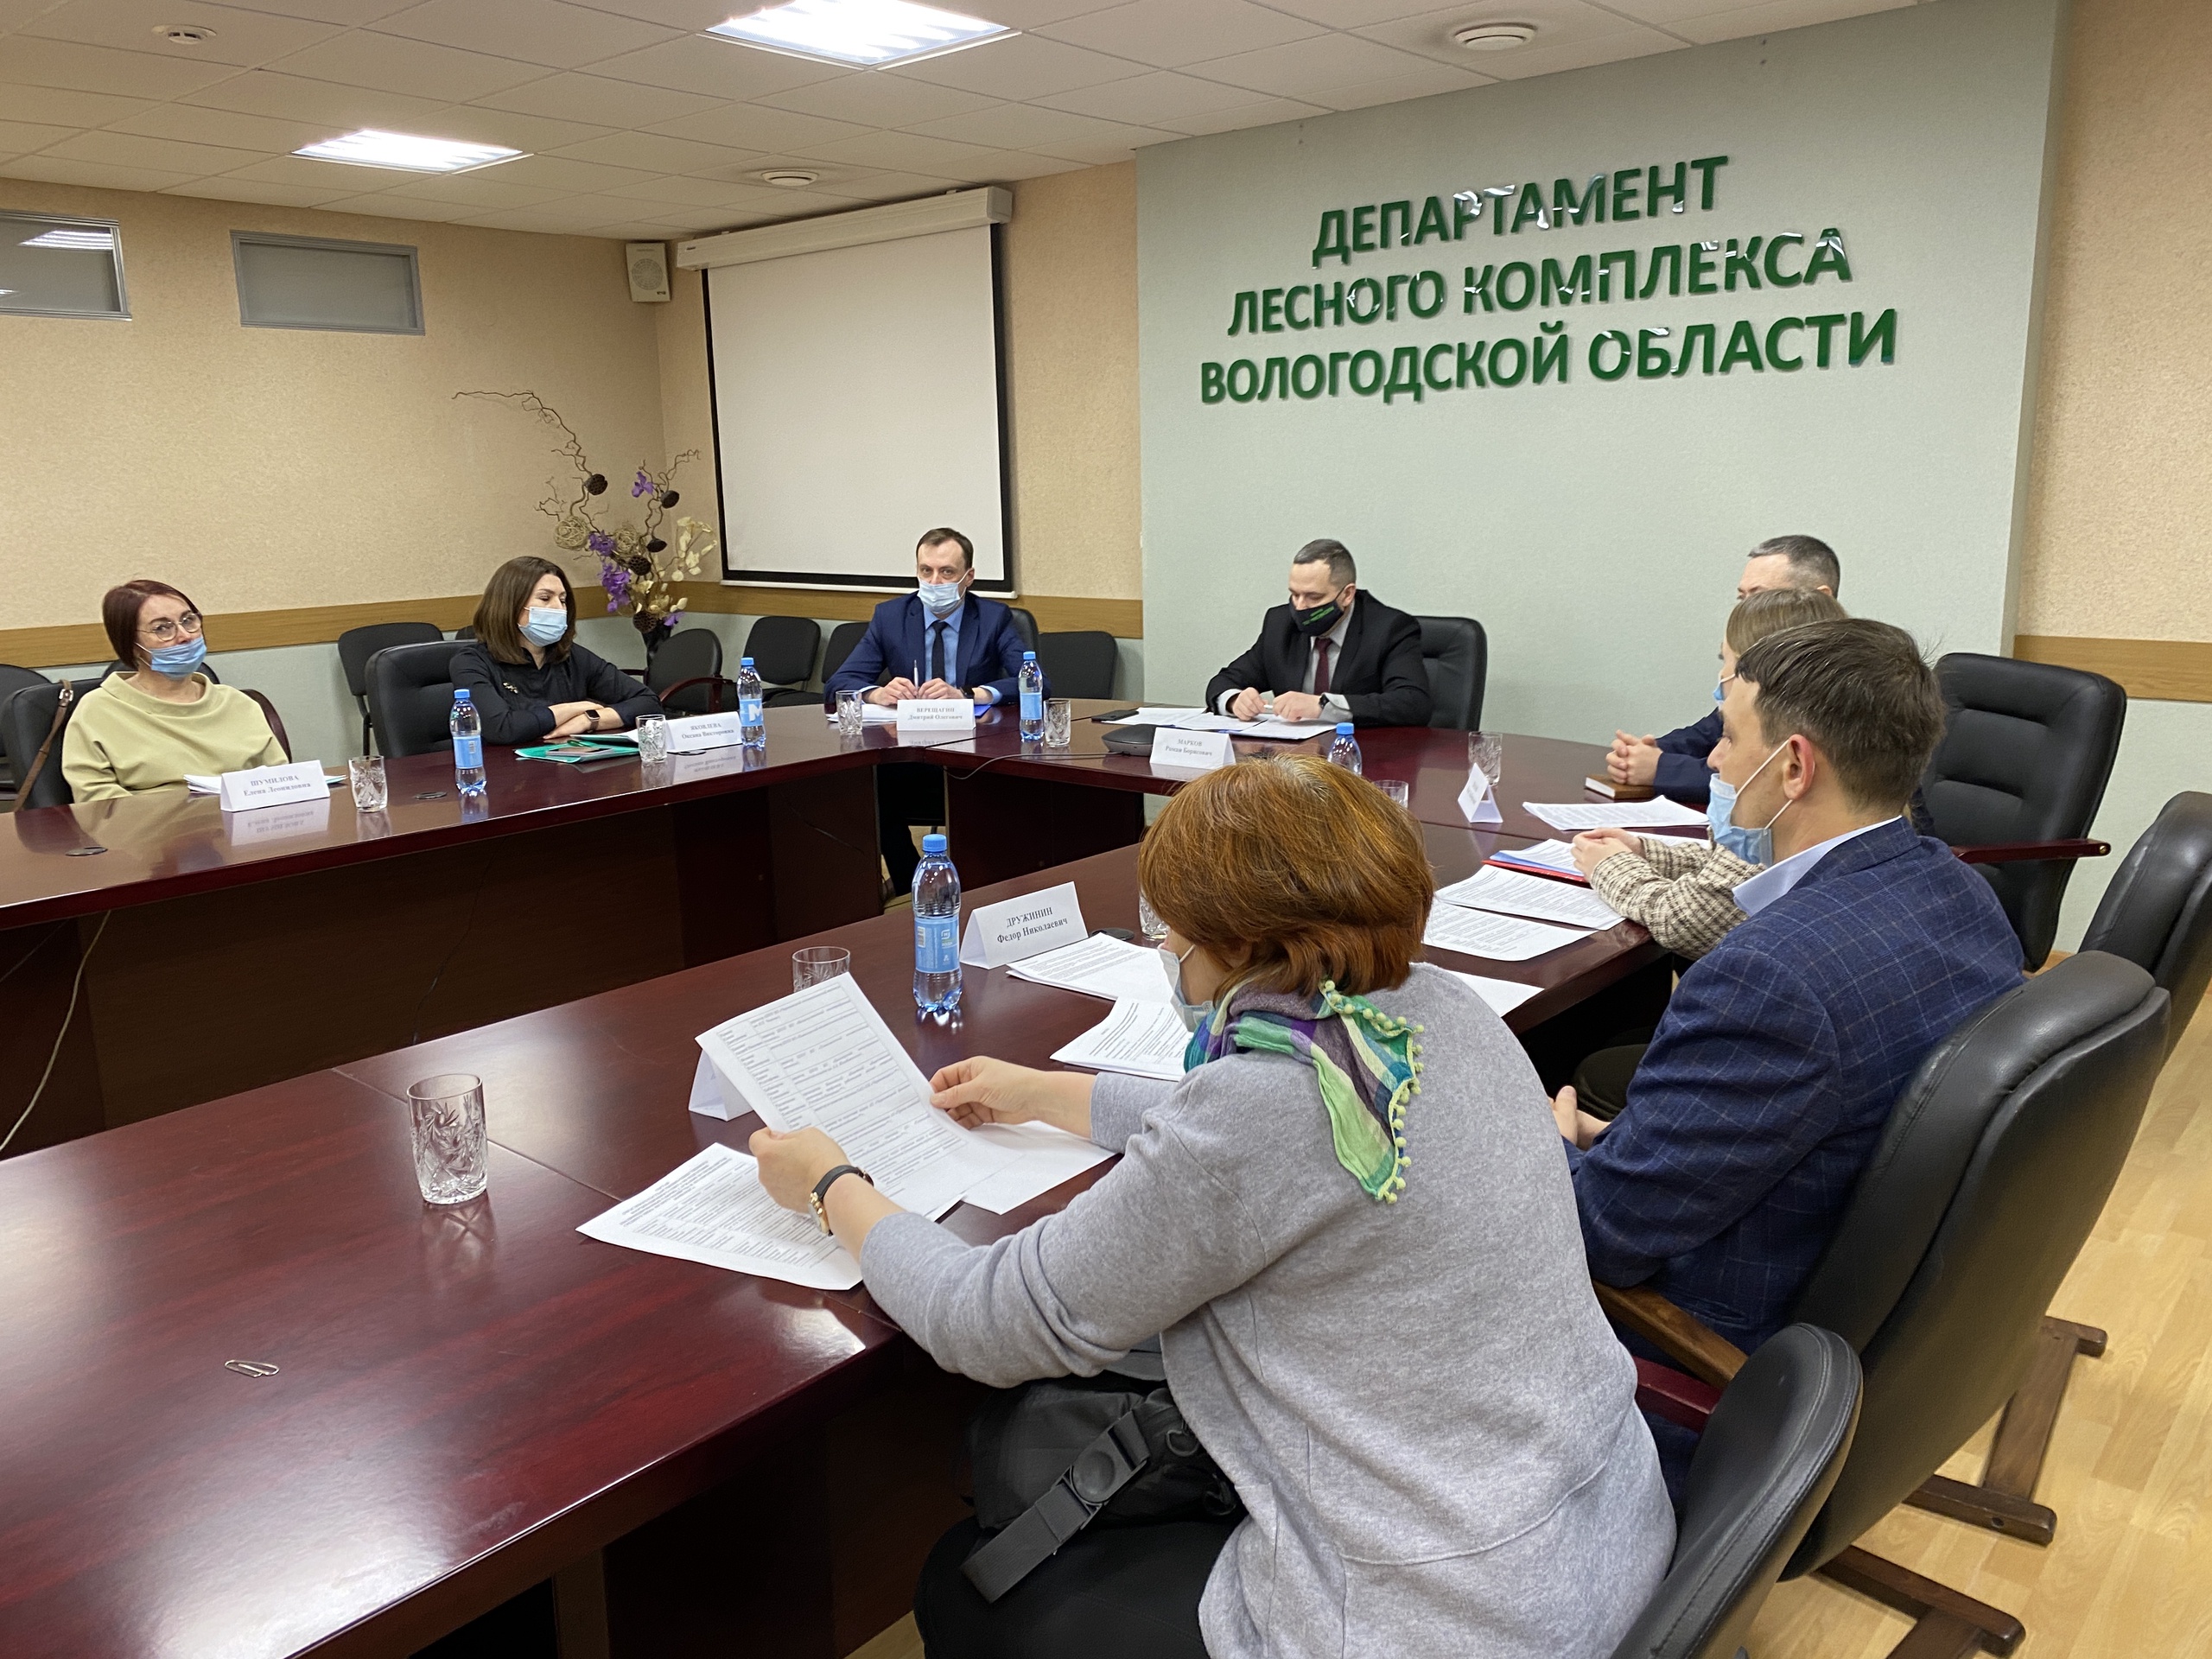 The most acute issues of personnel training for forestry and timber industry were discussed in the department of forestry complex of the region